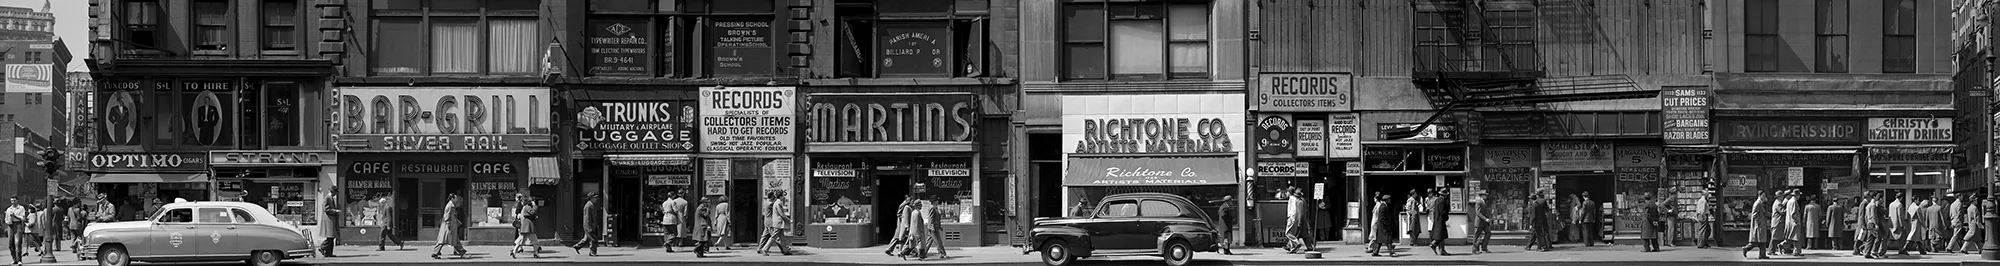 Sixth Avenue Between 43rd and 44th Streets, 1948